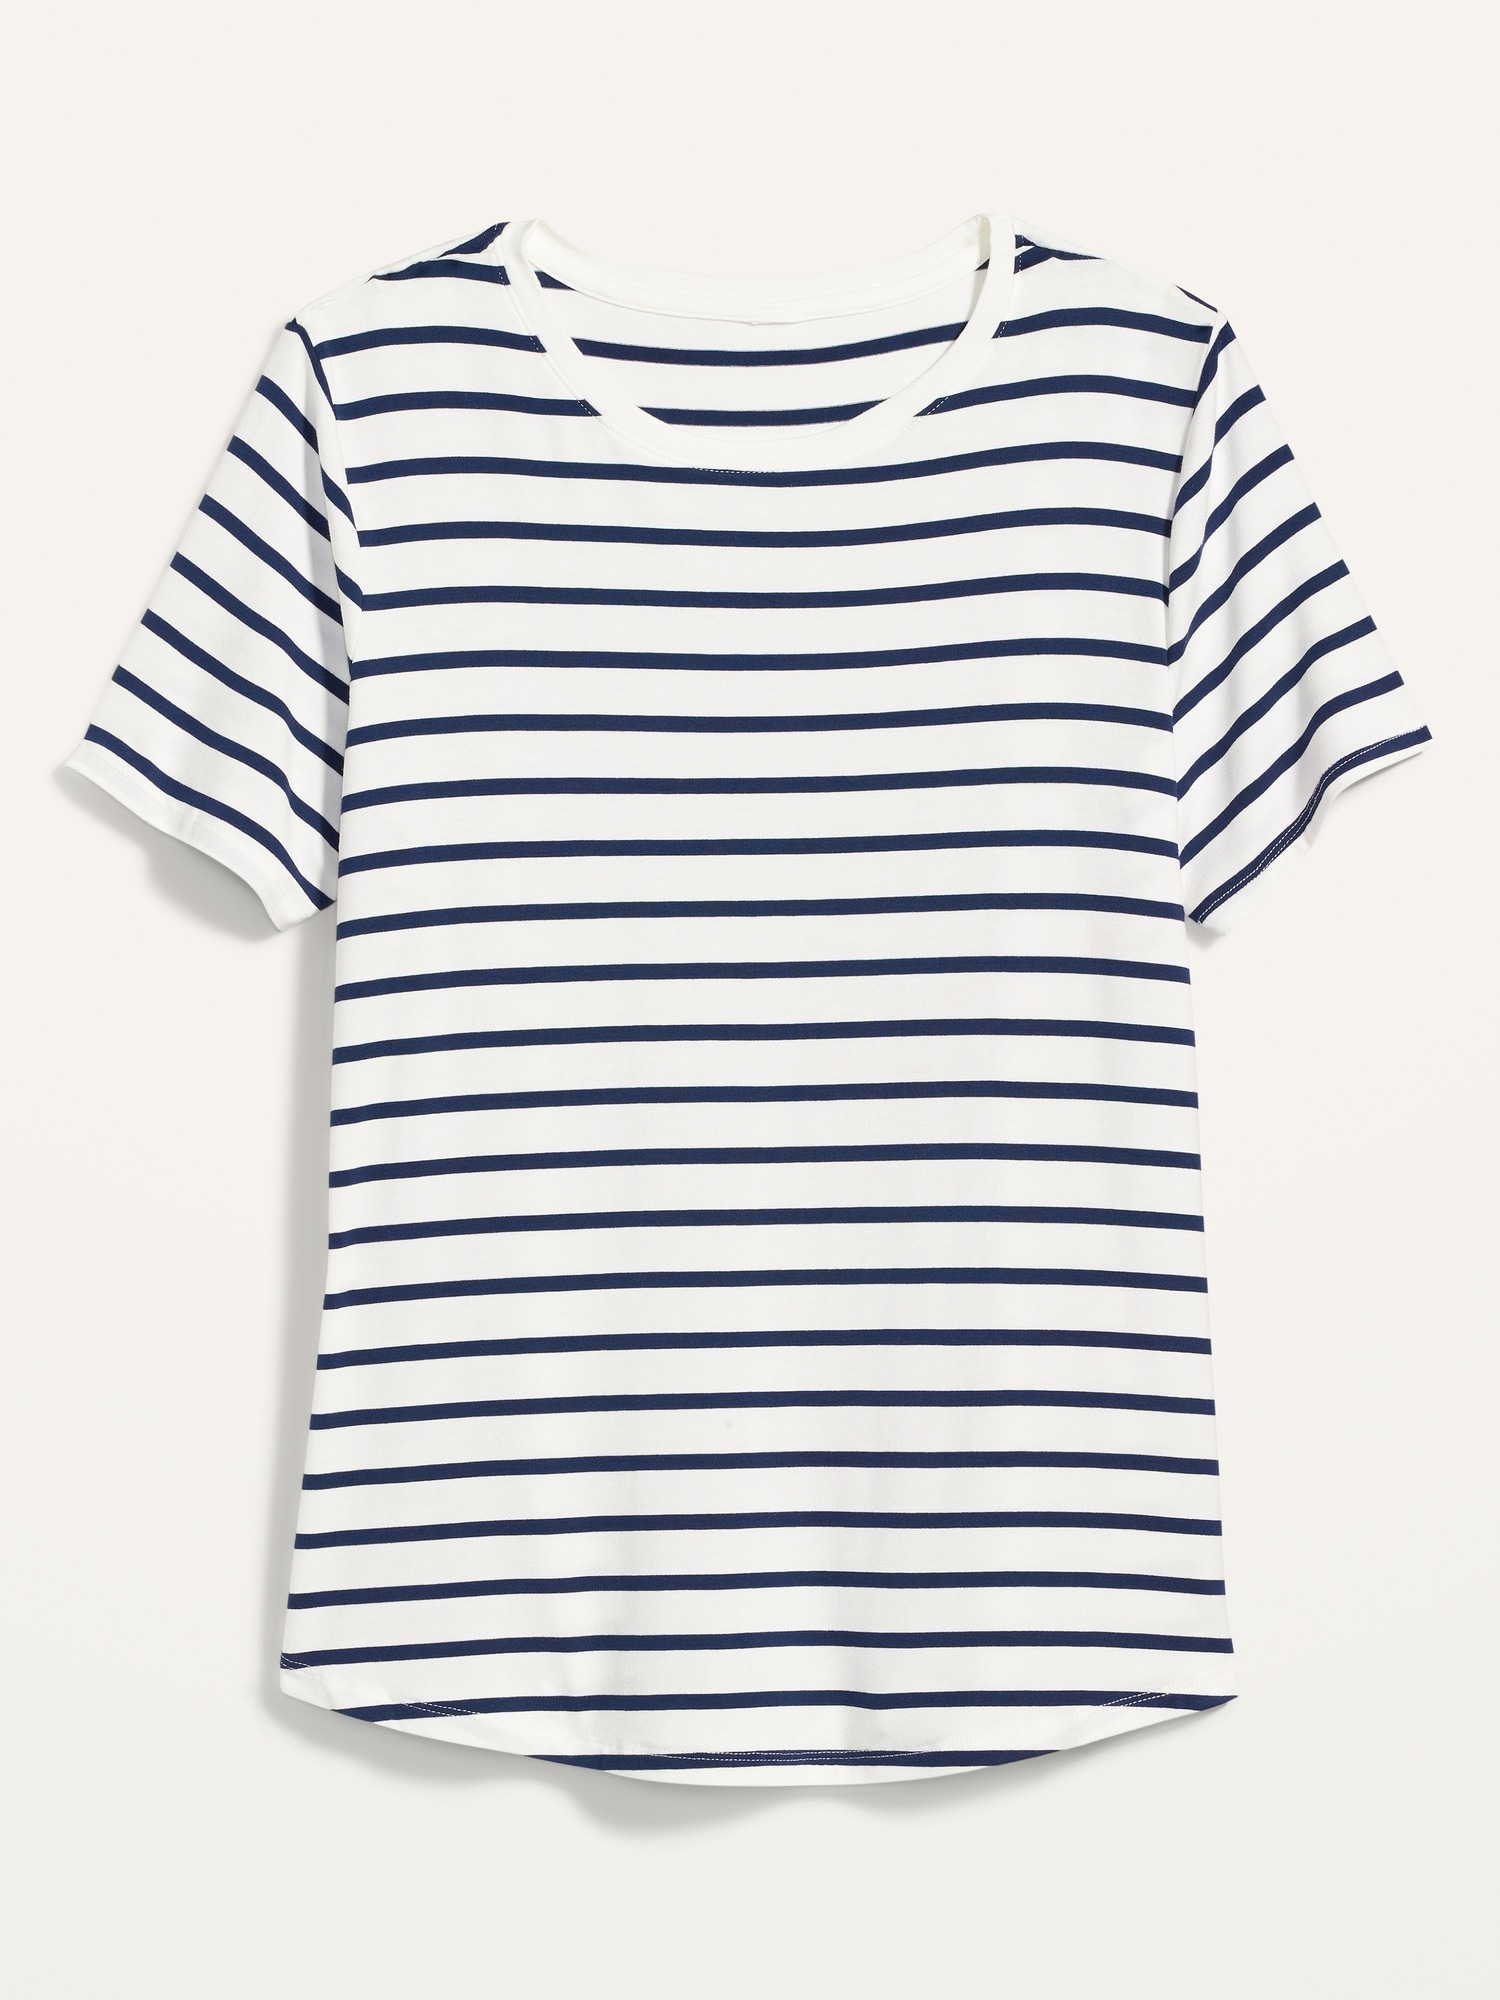 Luxe Striped Crew-Neck Tee for Women 